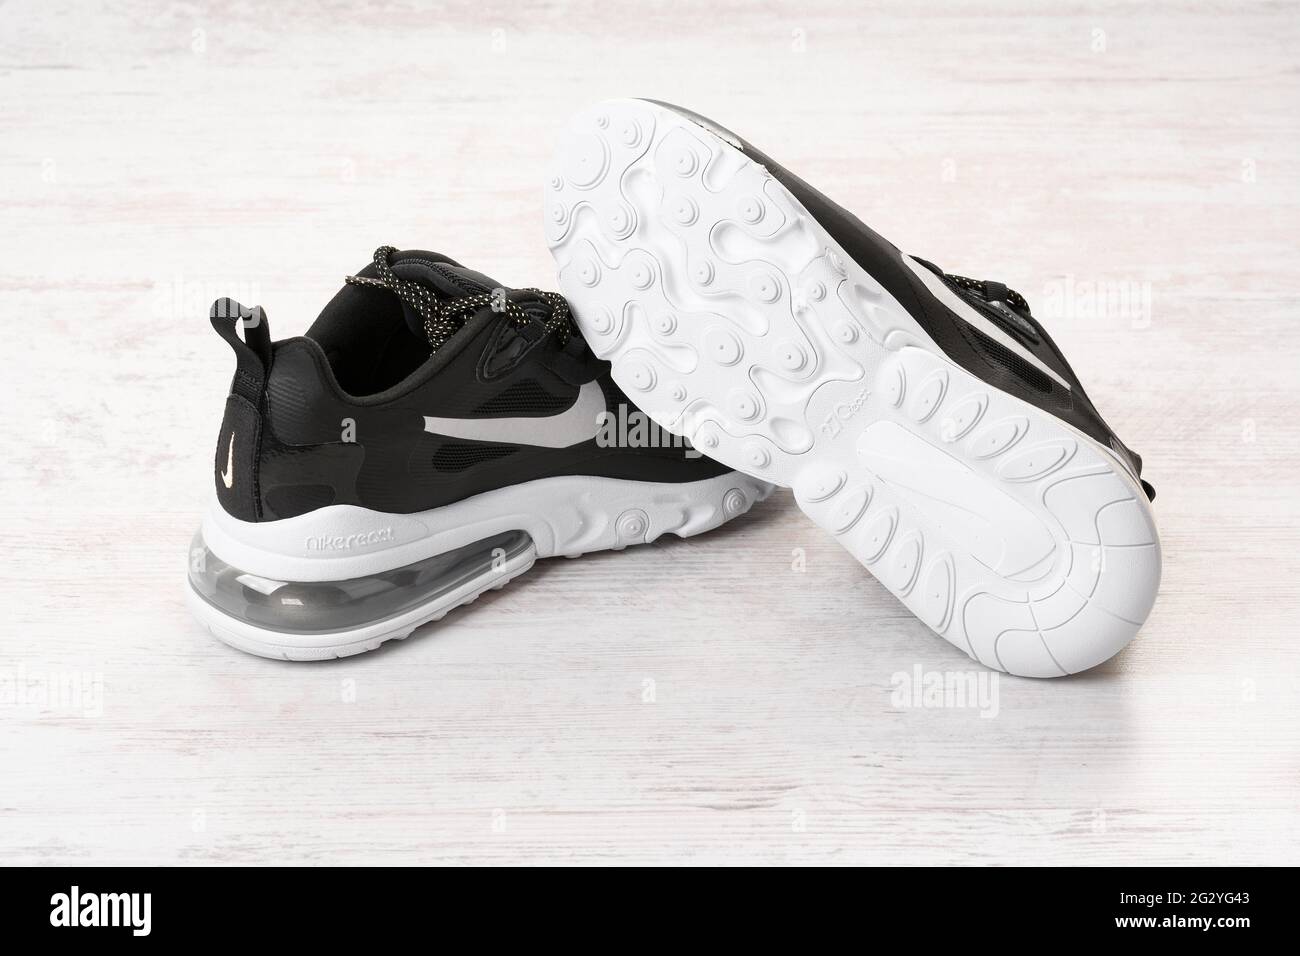 BURGAS, BULGARIA - DECEMBER 8, 2020: Nike Air MAX 270 REACT women's shoes -  sneakers in black on white wooden background. Nike is a global sports clot  Stock Photo - Alamy